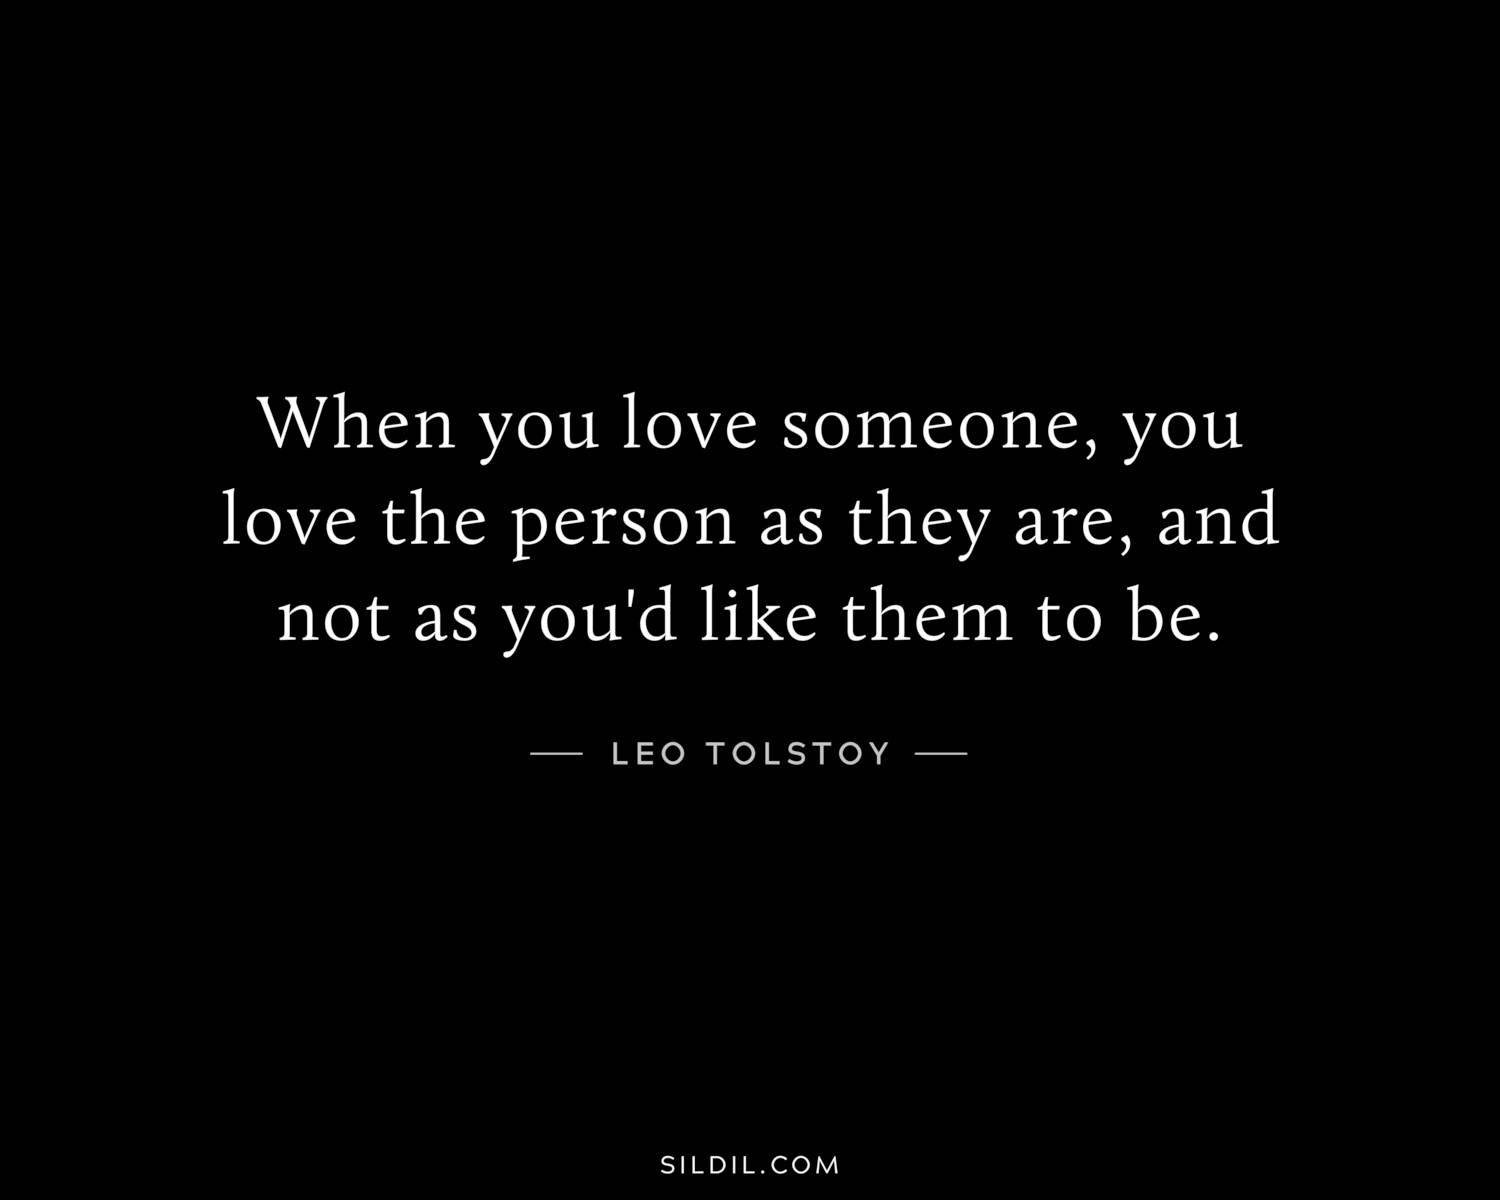 When you love someone, you love the person as they are, and not as you'd like them to be.